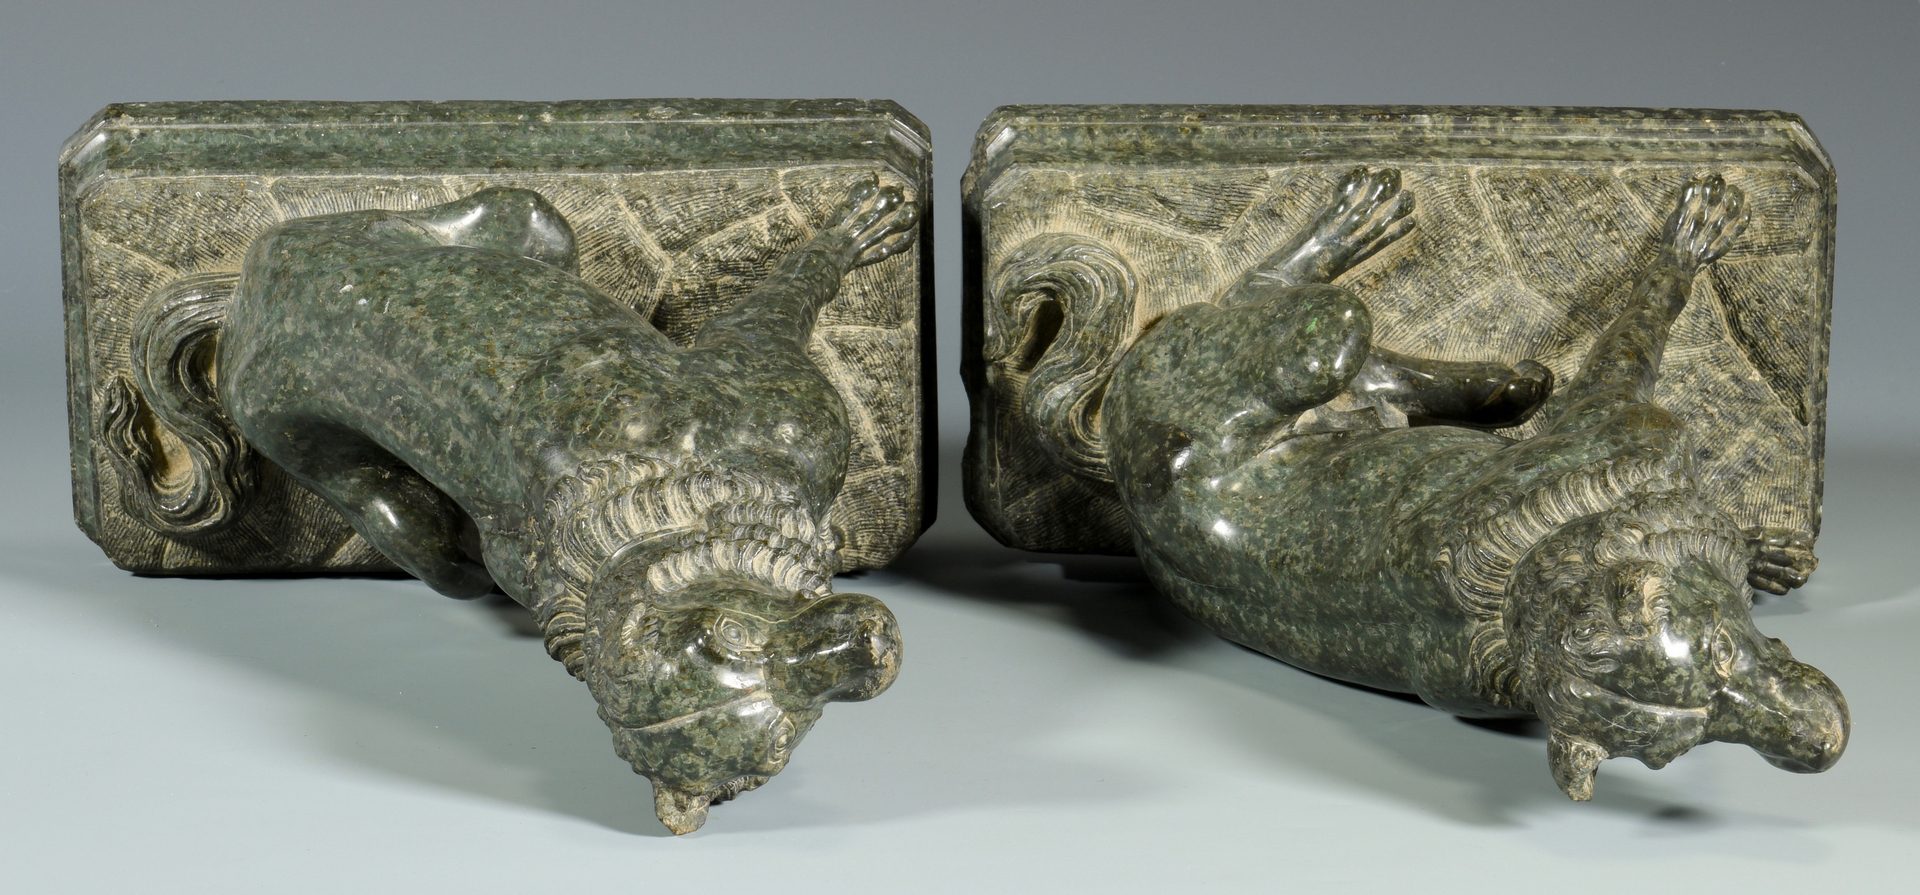 Lot 364: Pr. 19th cent. Variegated Marble Dogs